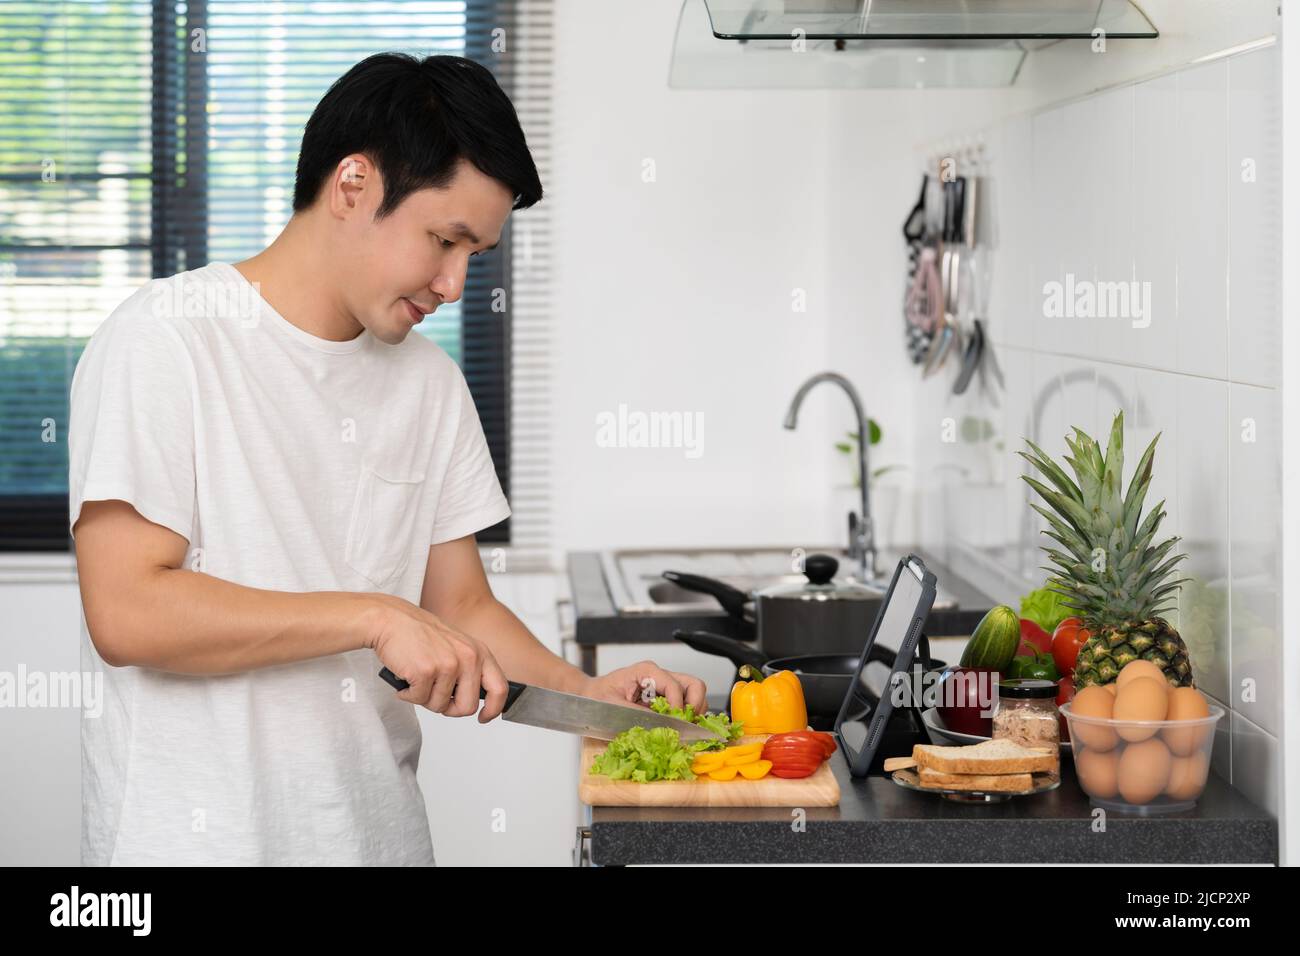 man cooking and preparing vegetables according to a recipe on a tablet computer in the kitchen at home Stock Photo